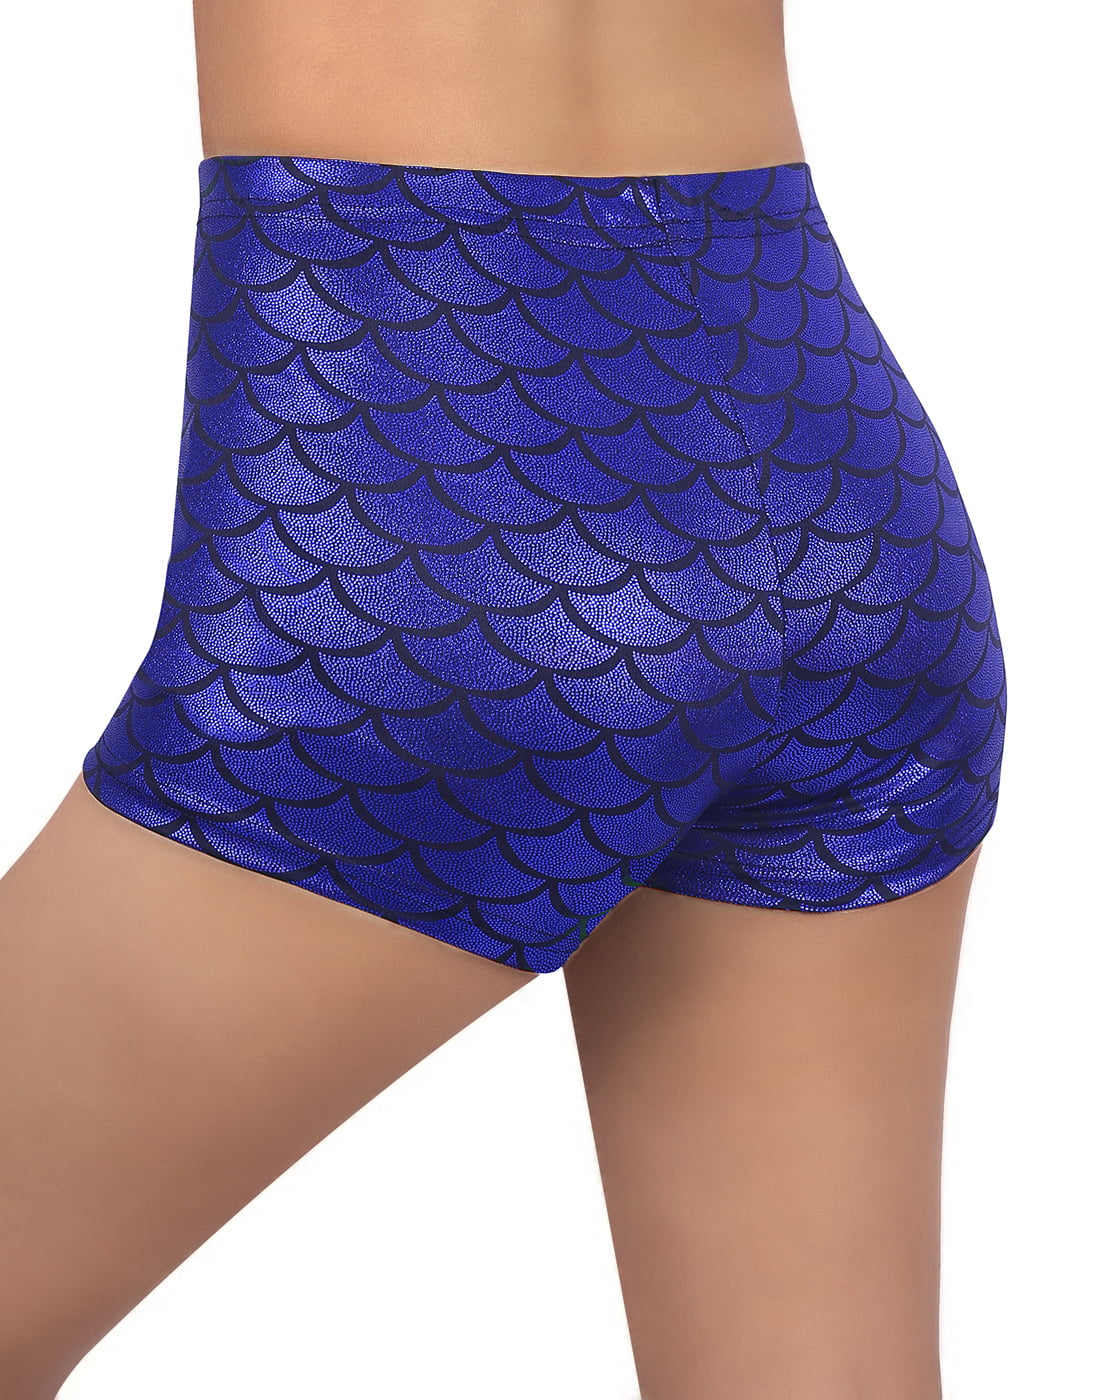 Women Shiny Mermaid Fish Scale High Waisted Rave Booty Shorts Bottoms